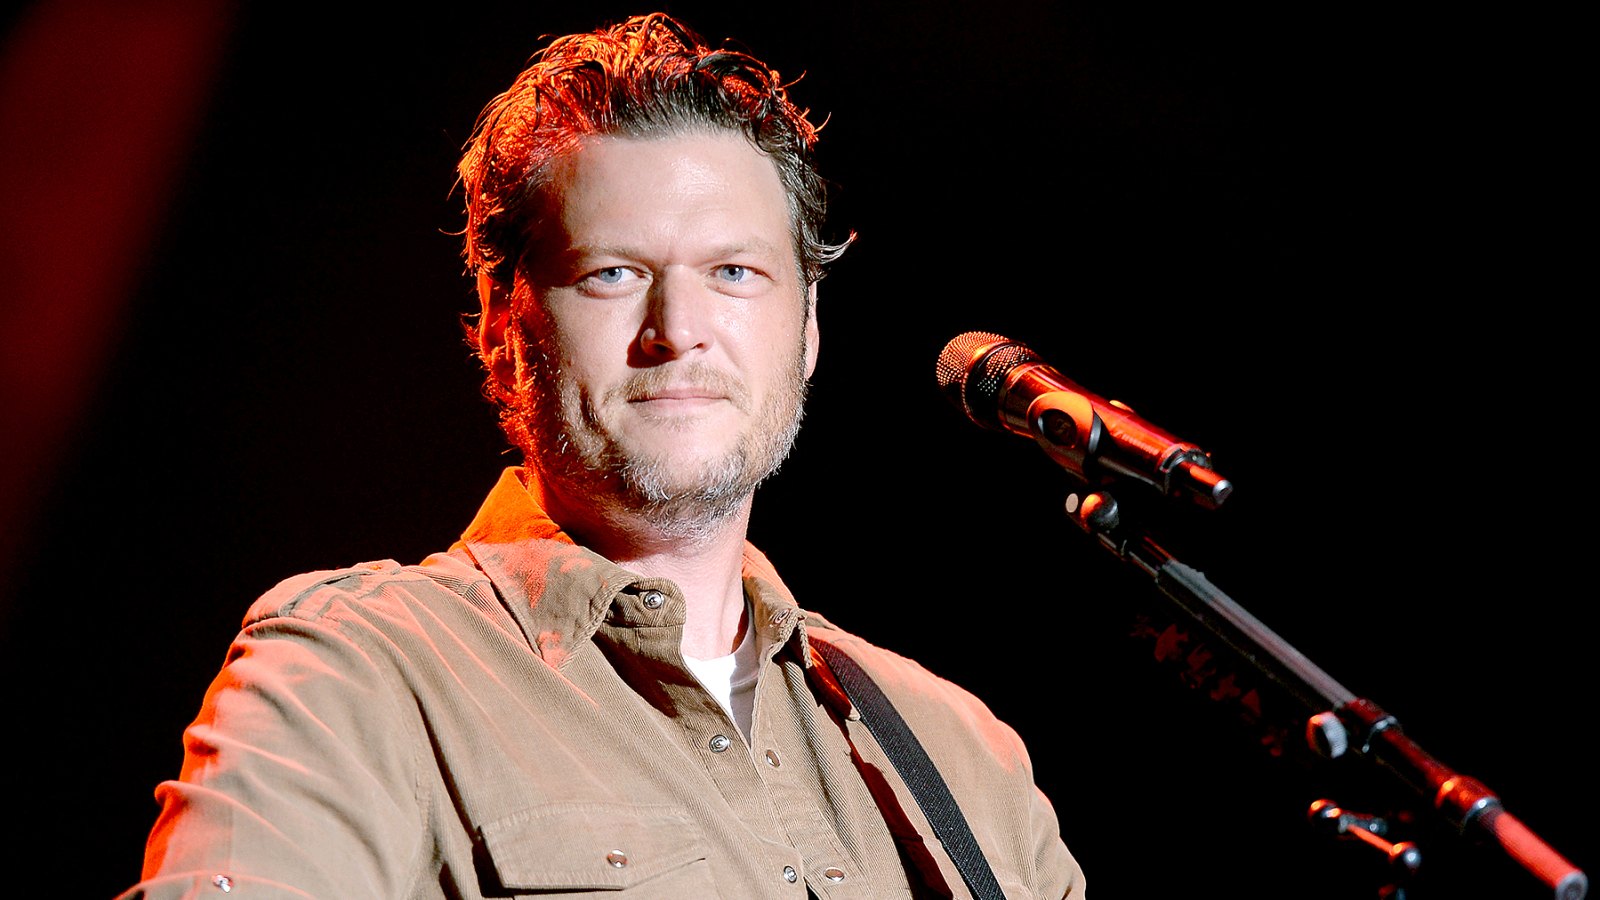 Blake Shelton performs onstage during day 1 of the Big Barrel Country Music Festival on June 26, 2015 in Dover, Delaware.